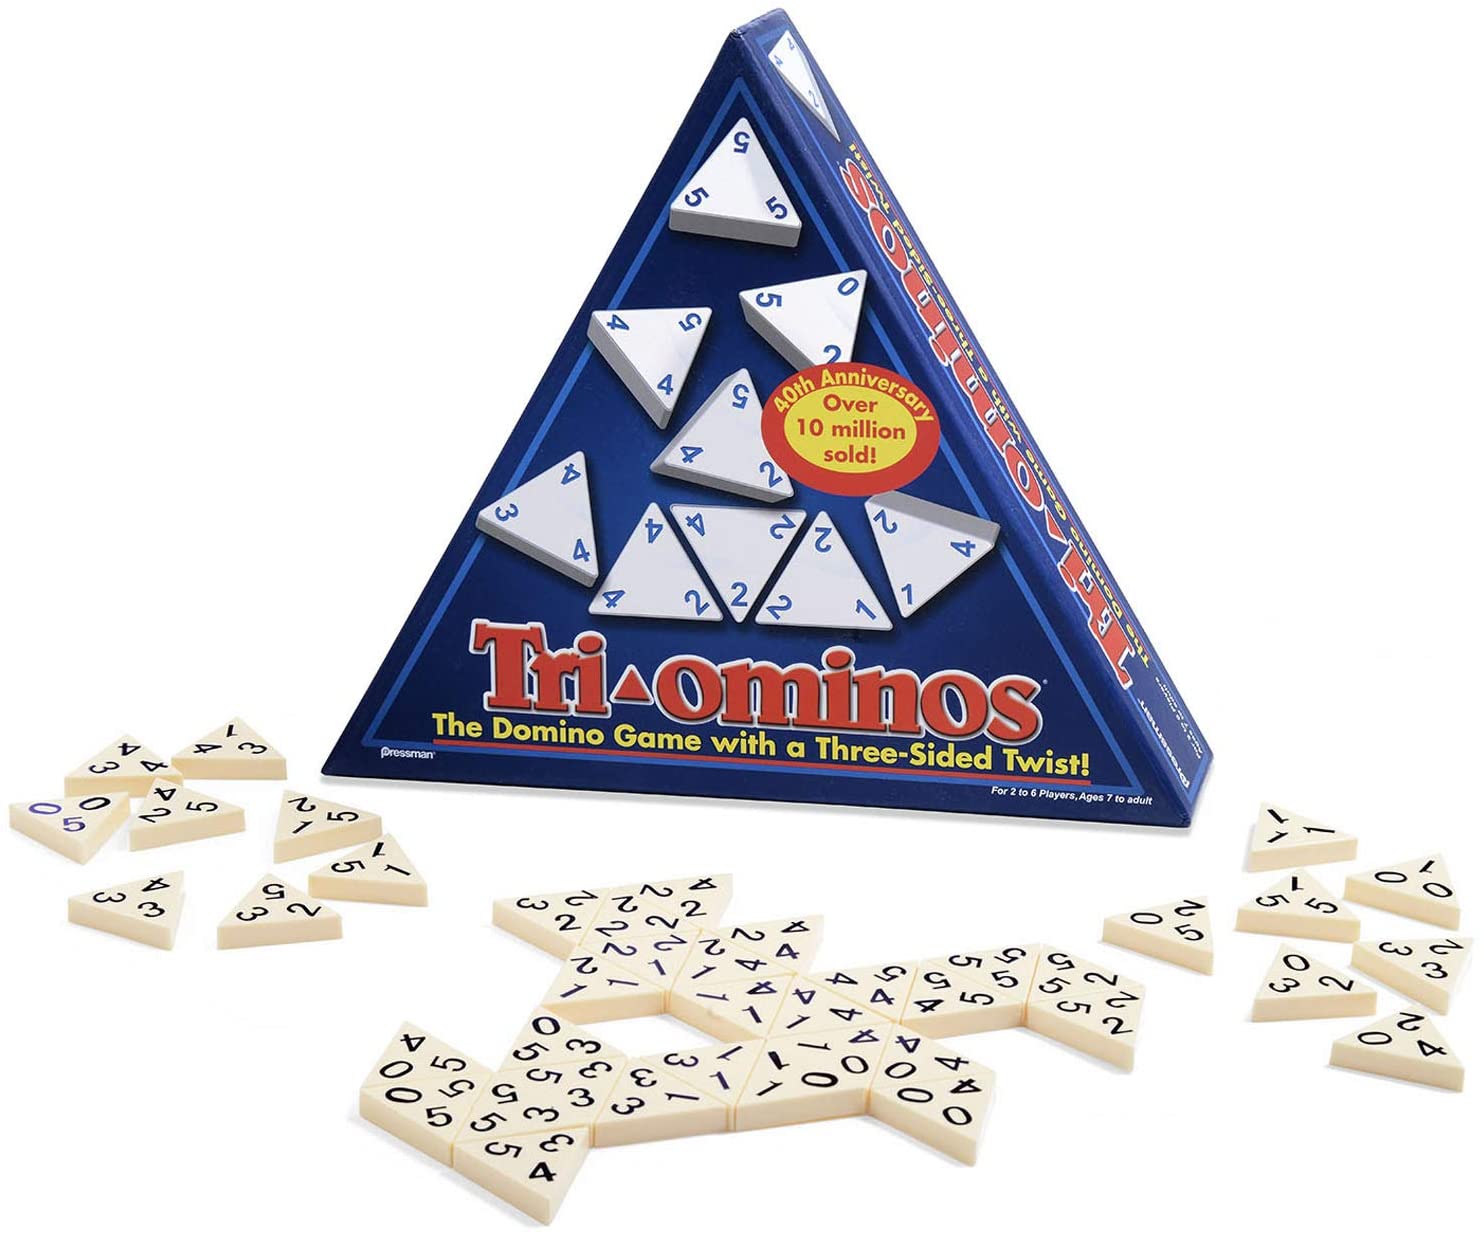 Pressman 4420 – Tri-ominos – the Domino Family Game with a 3 Sided